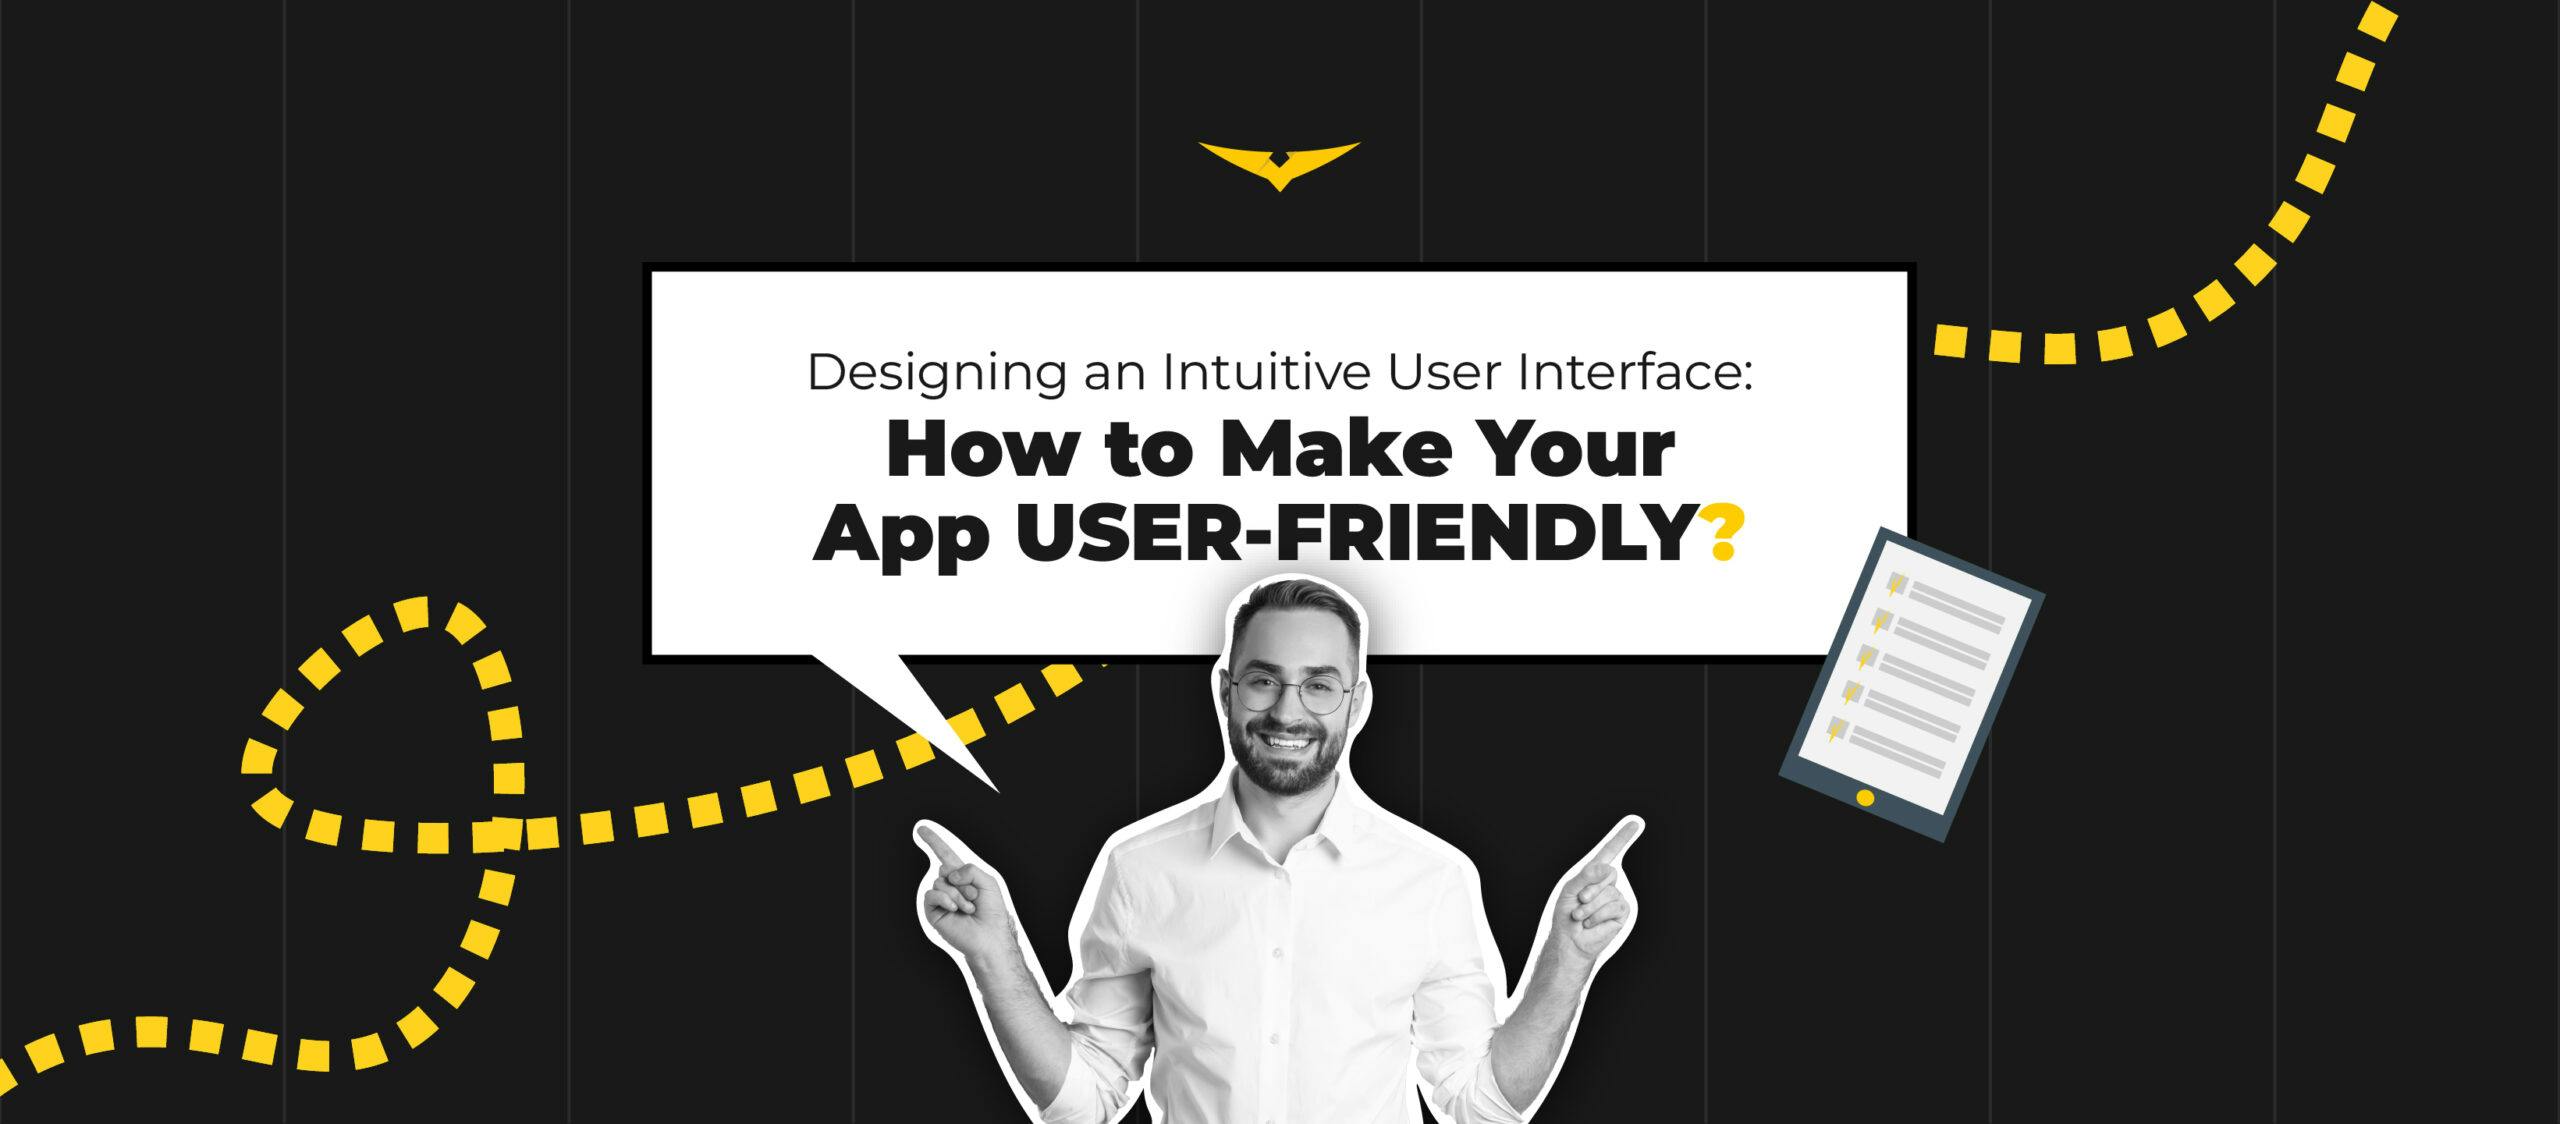 Designing an Intuitive User Interface: How to Make Your App User-Friendly? 